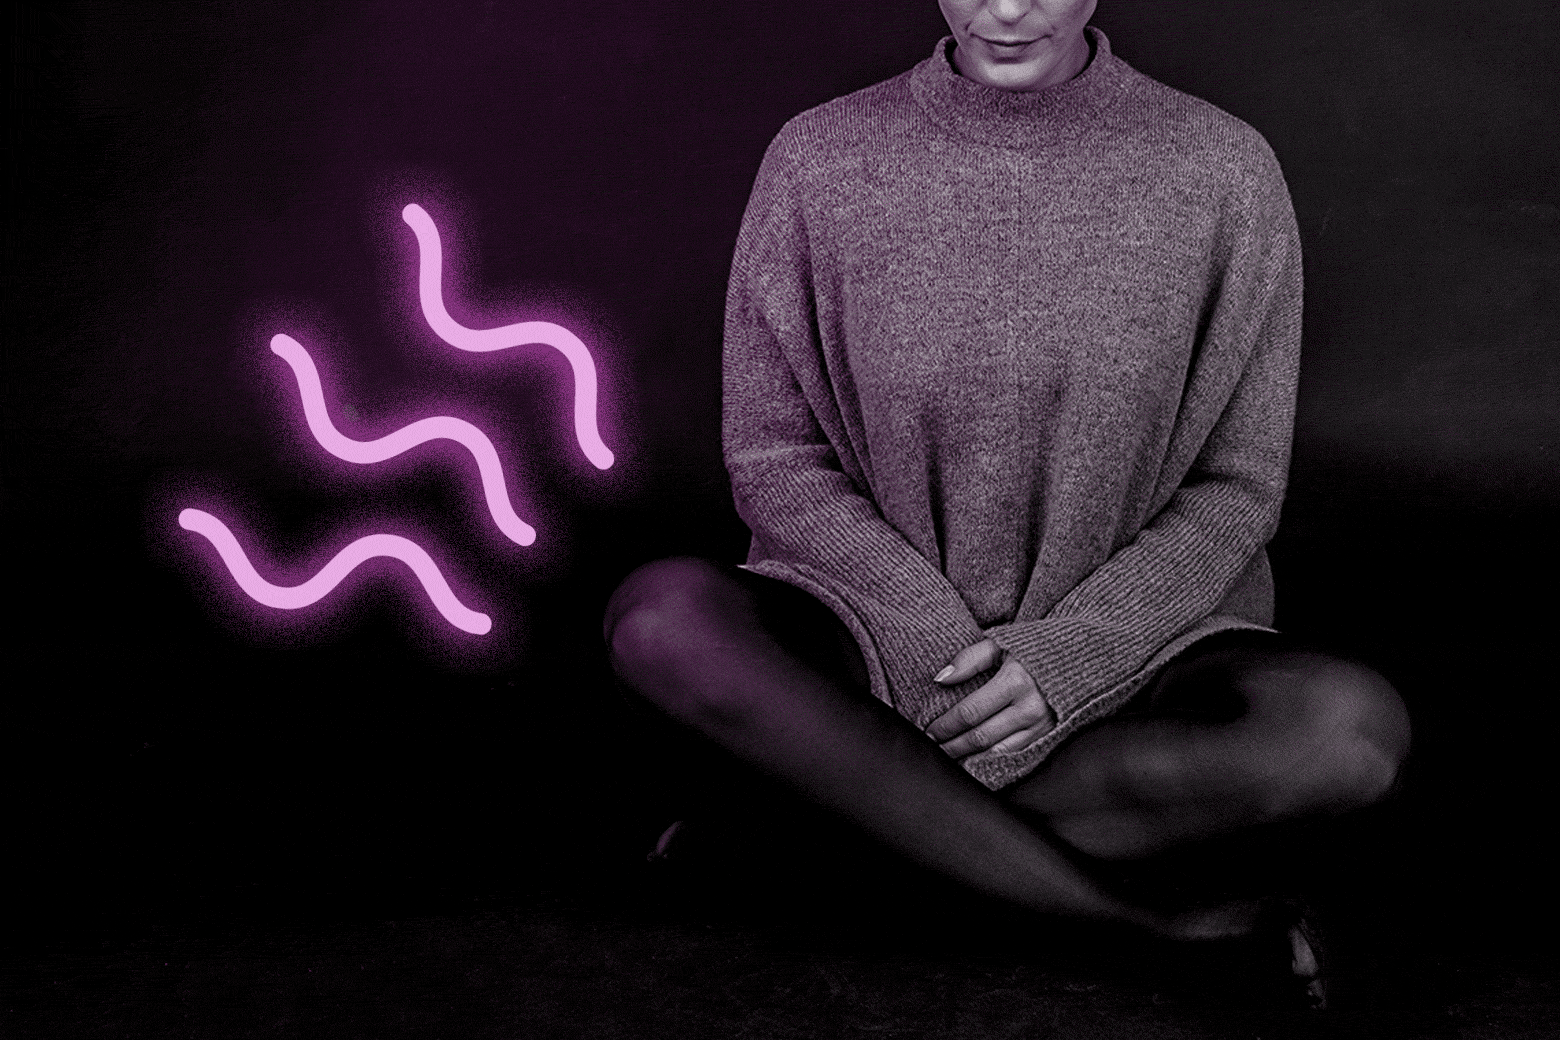 Woman sitting cross-legged next to a neon illustration of odor or smell